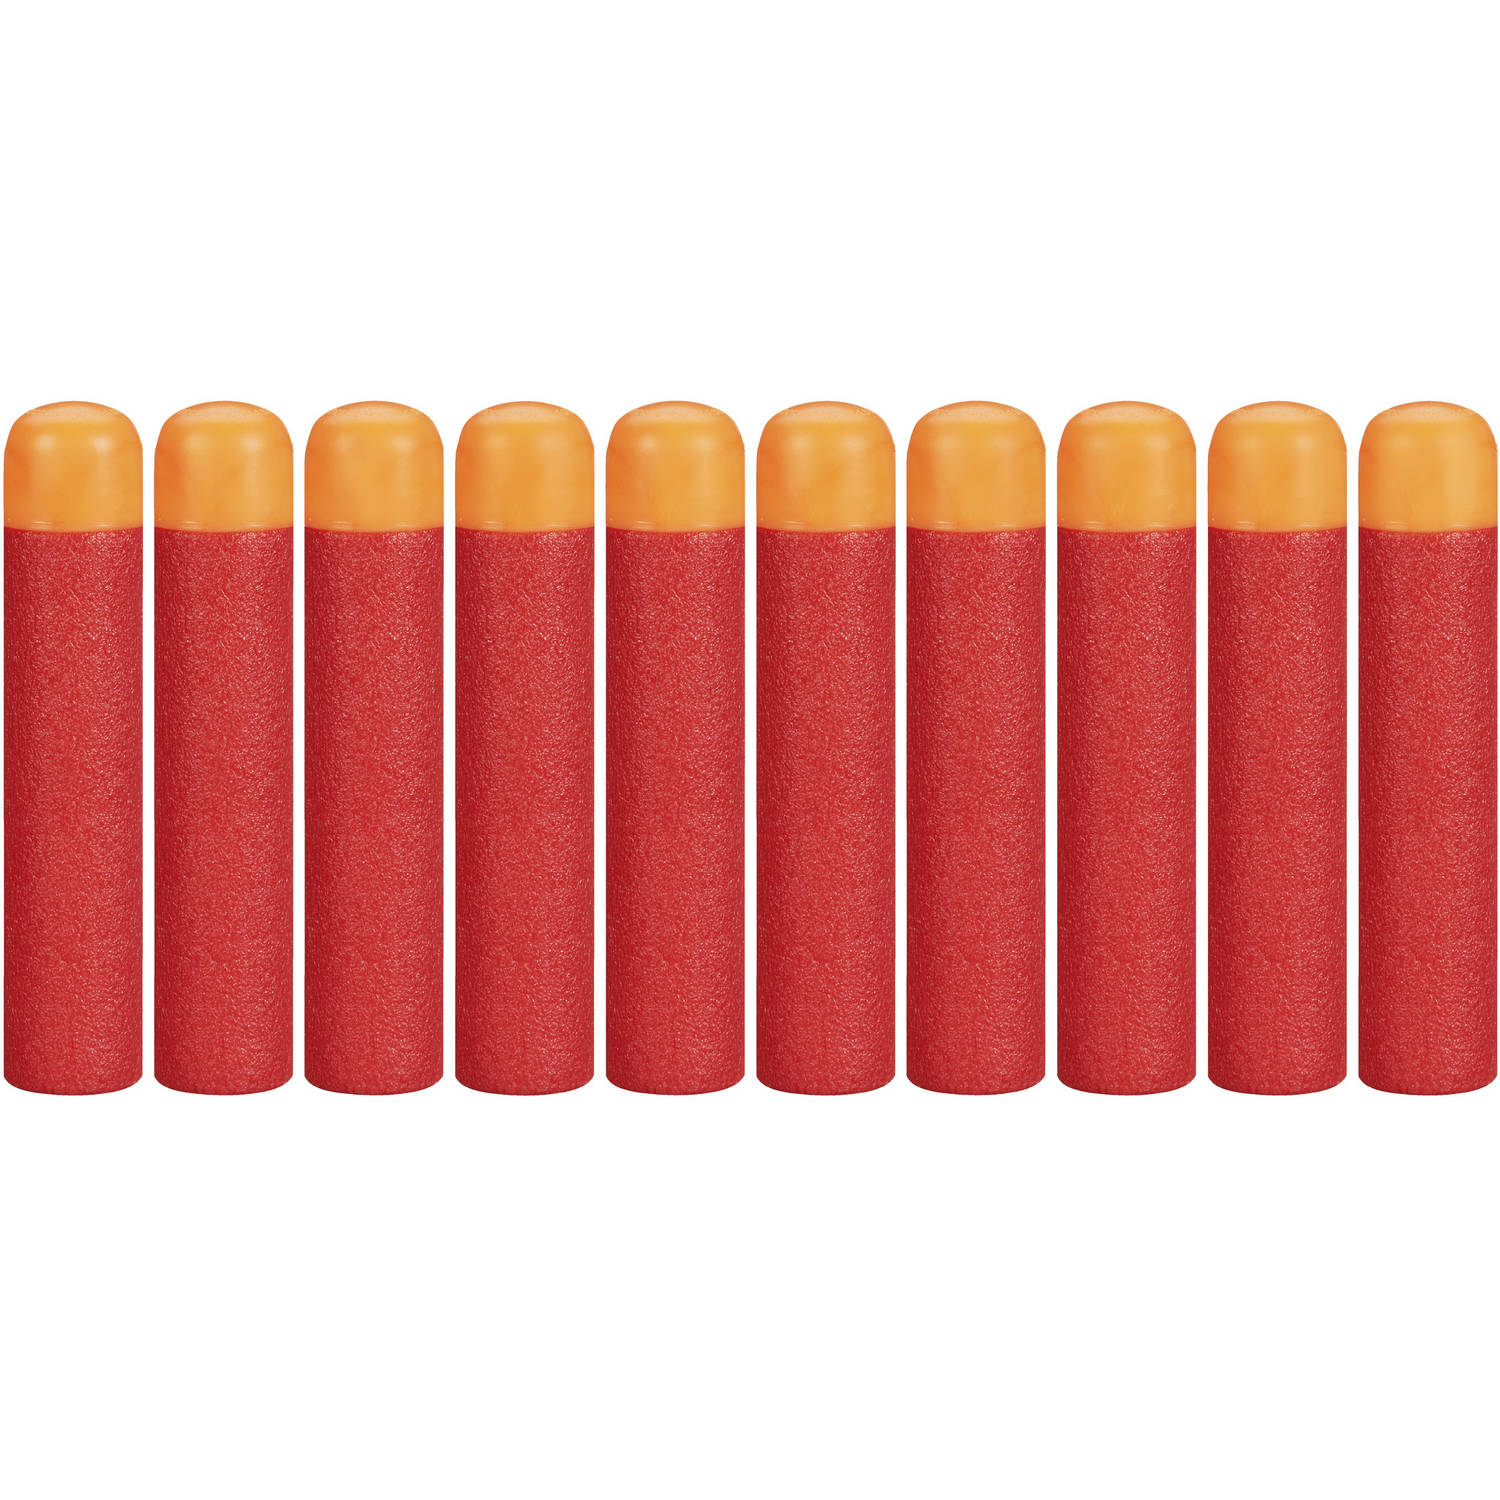 Nerf N-Strike Mega Dart Refill (10 pack), for Ages 8 and Up - image 3 of 4